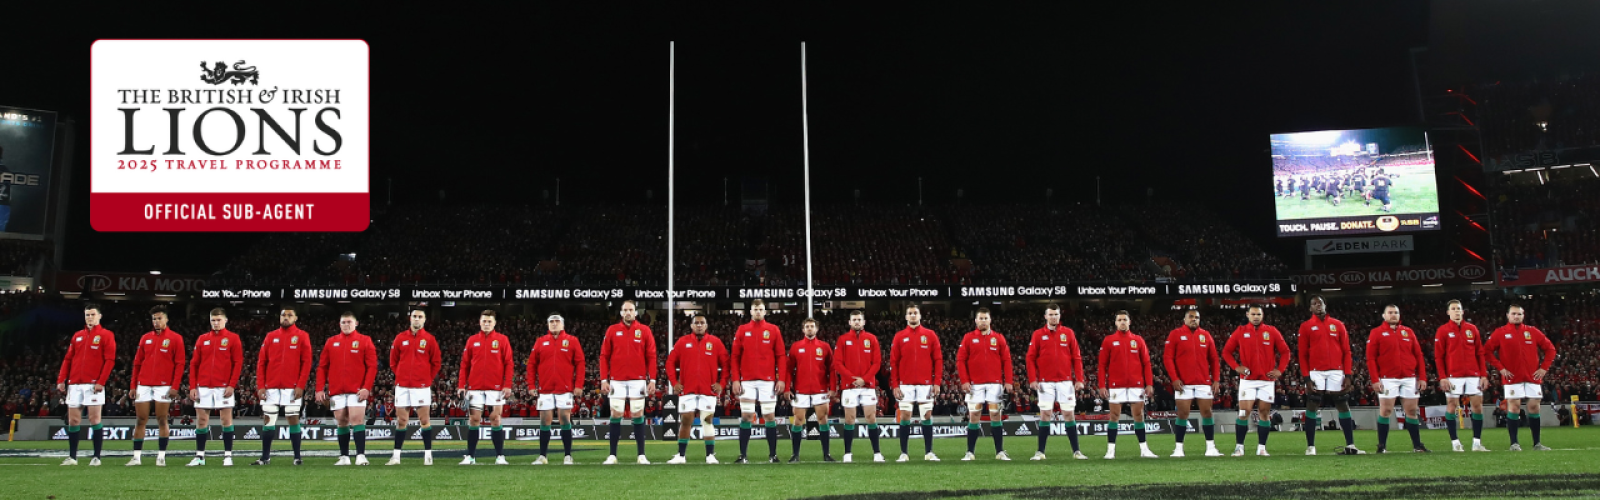 The British & Irish Lions Australia 2025 official ticket packages for rugby fans image